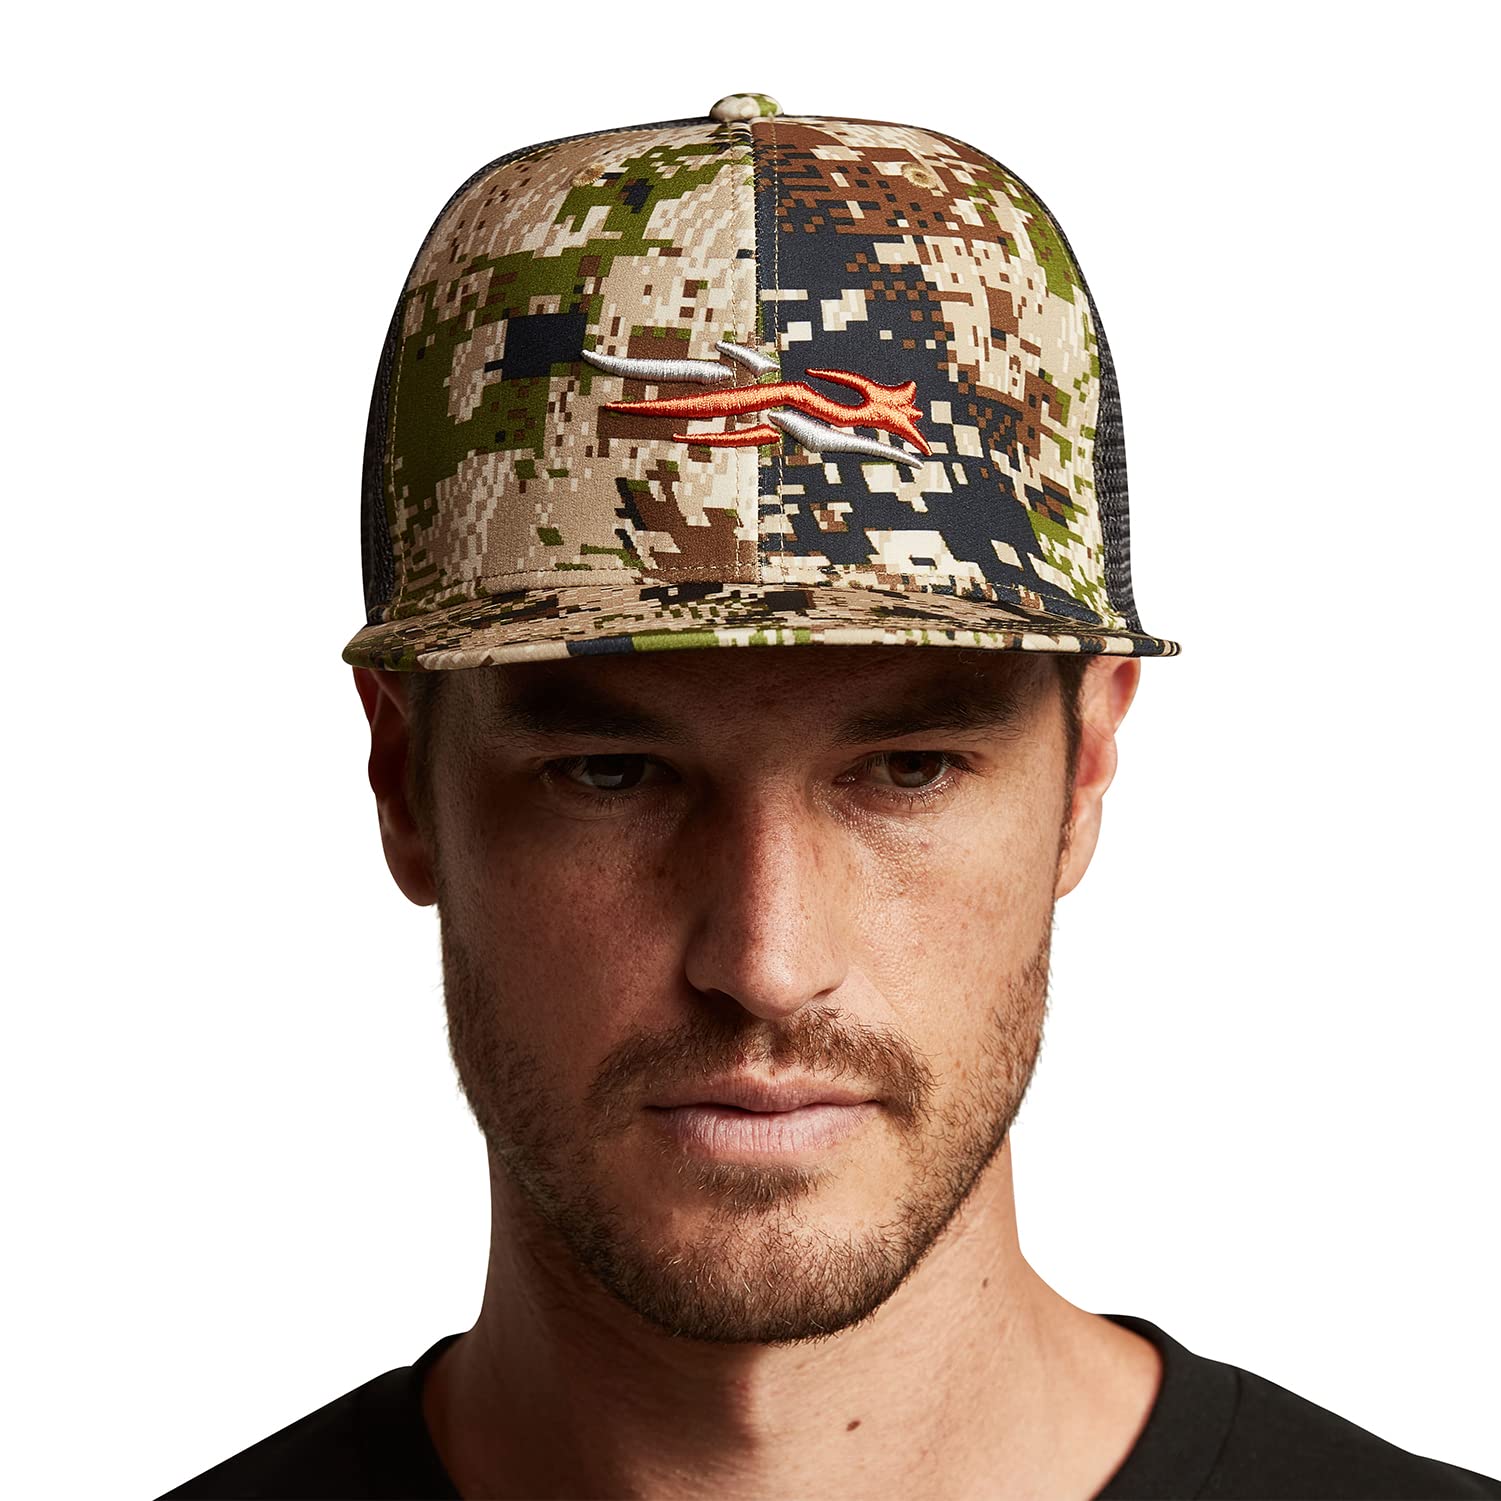 SITKA Gear Men's Trucker Breathable Mesh Hunting Cap-One Size Fits All